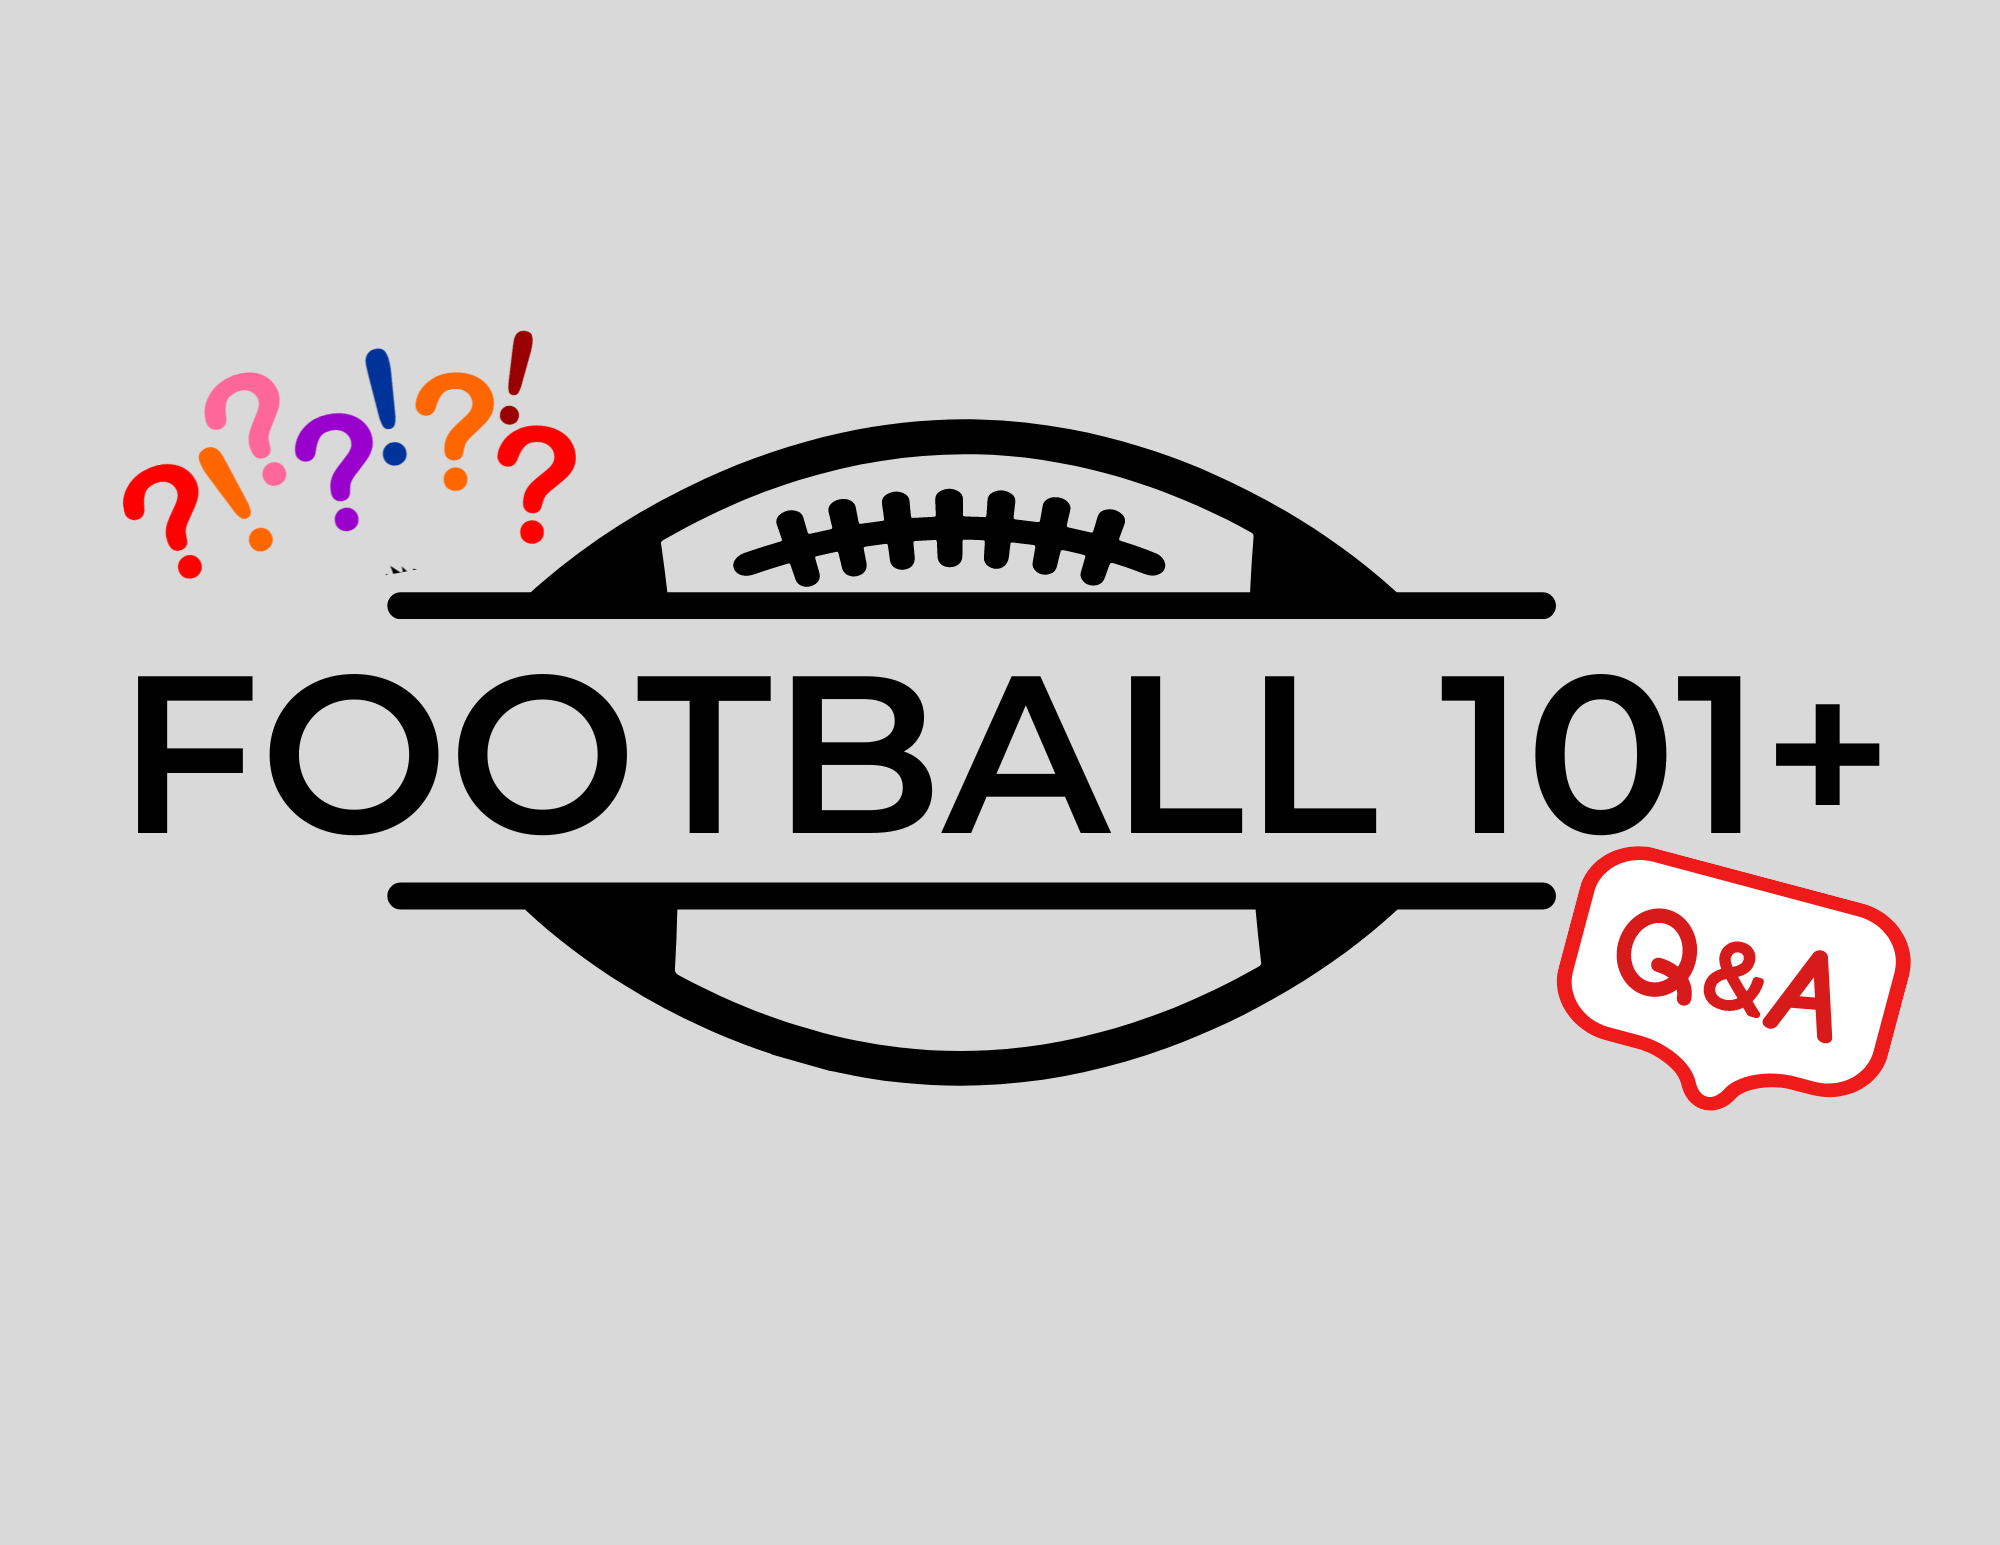 A football is centered with text overlay stating "Football 101+" with colorful question marks surrounding the football and a sticker/badge labeled "Q&A"